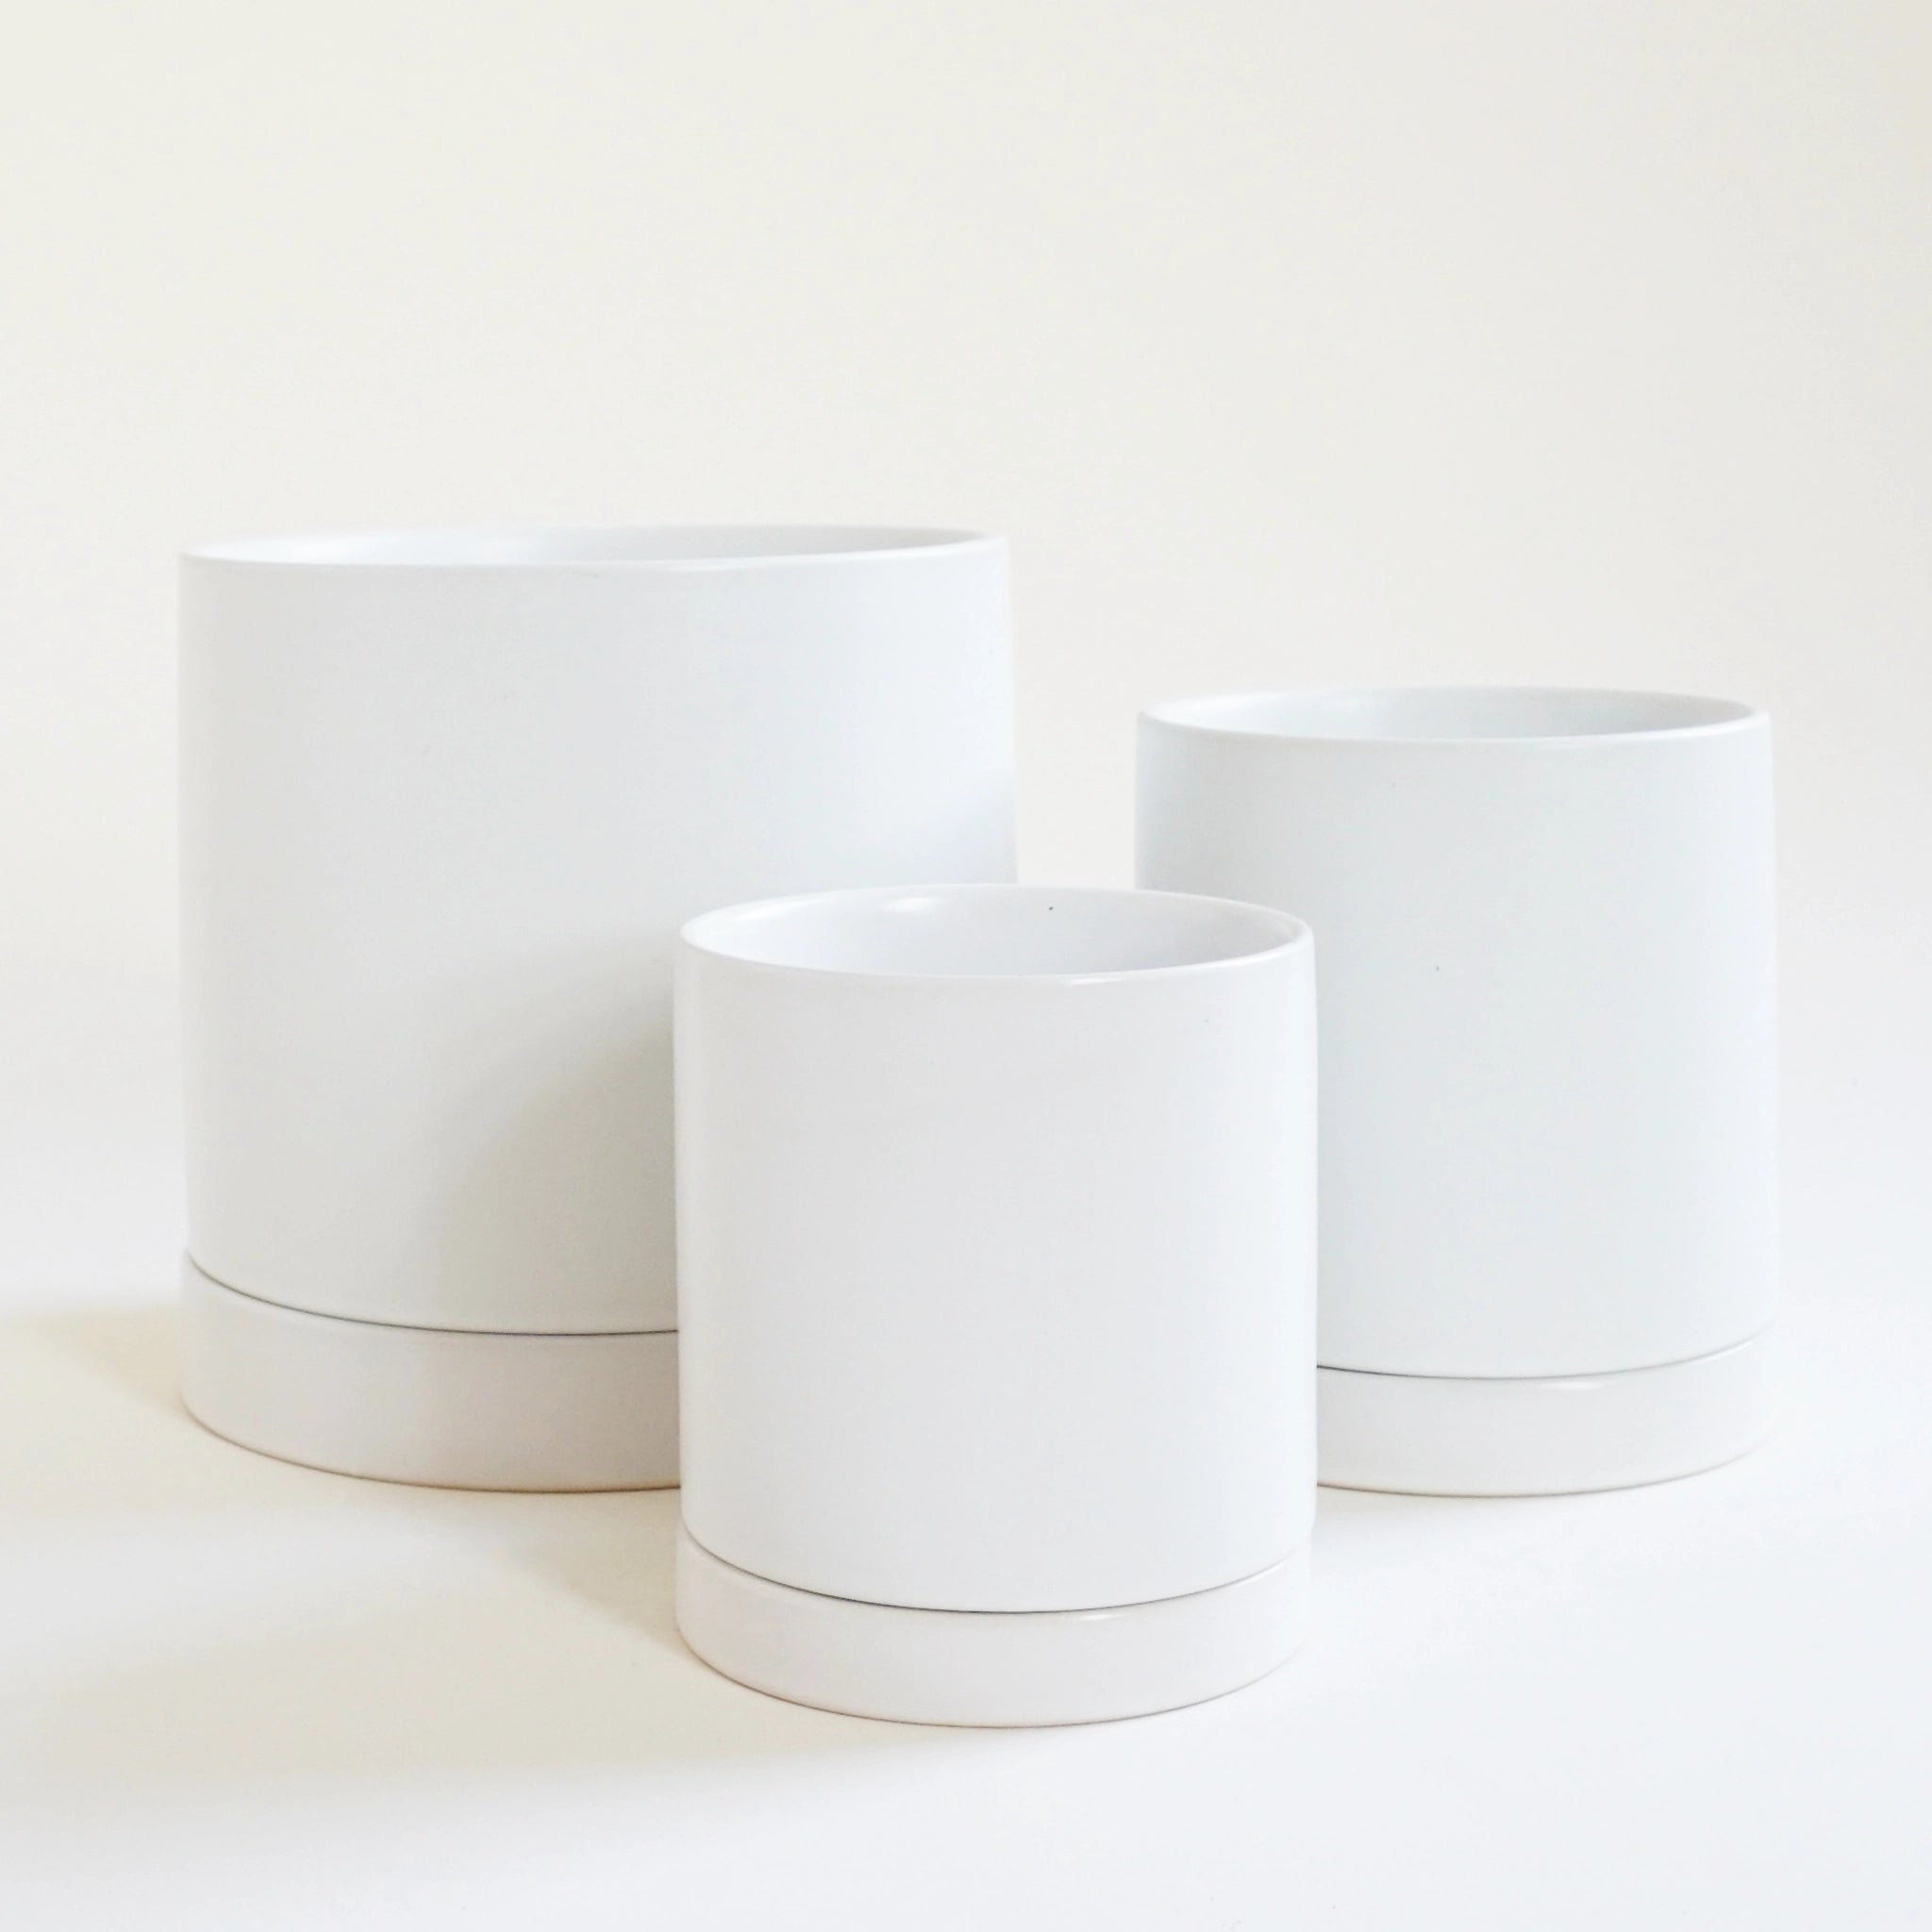 a small, medium, and large simple white pot with matching saucer all sit on a white ground